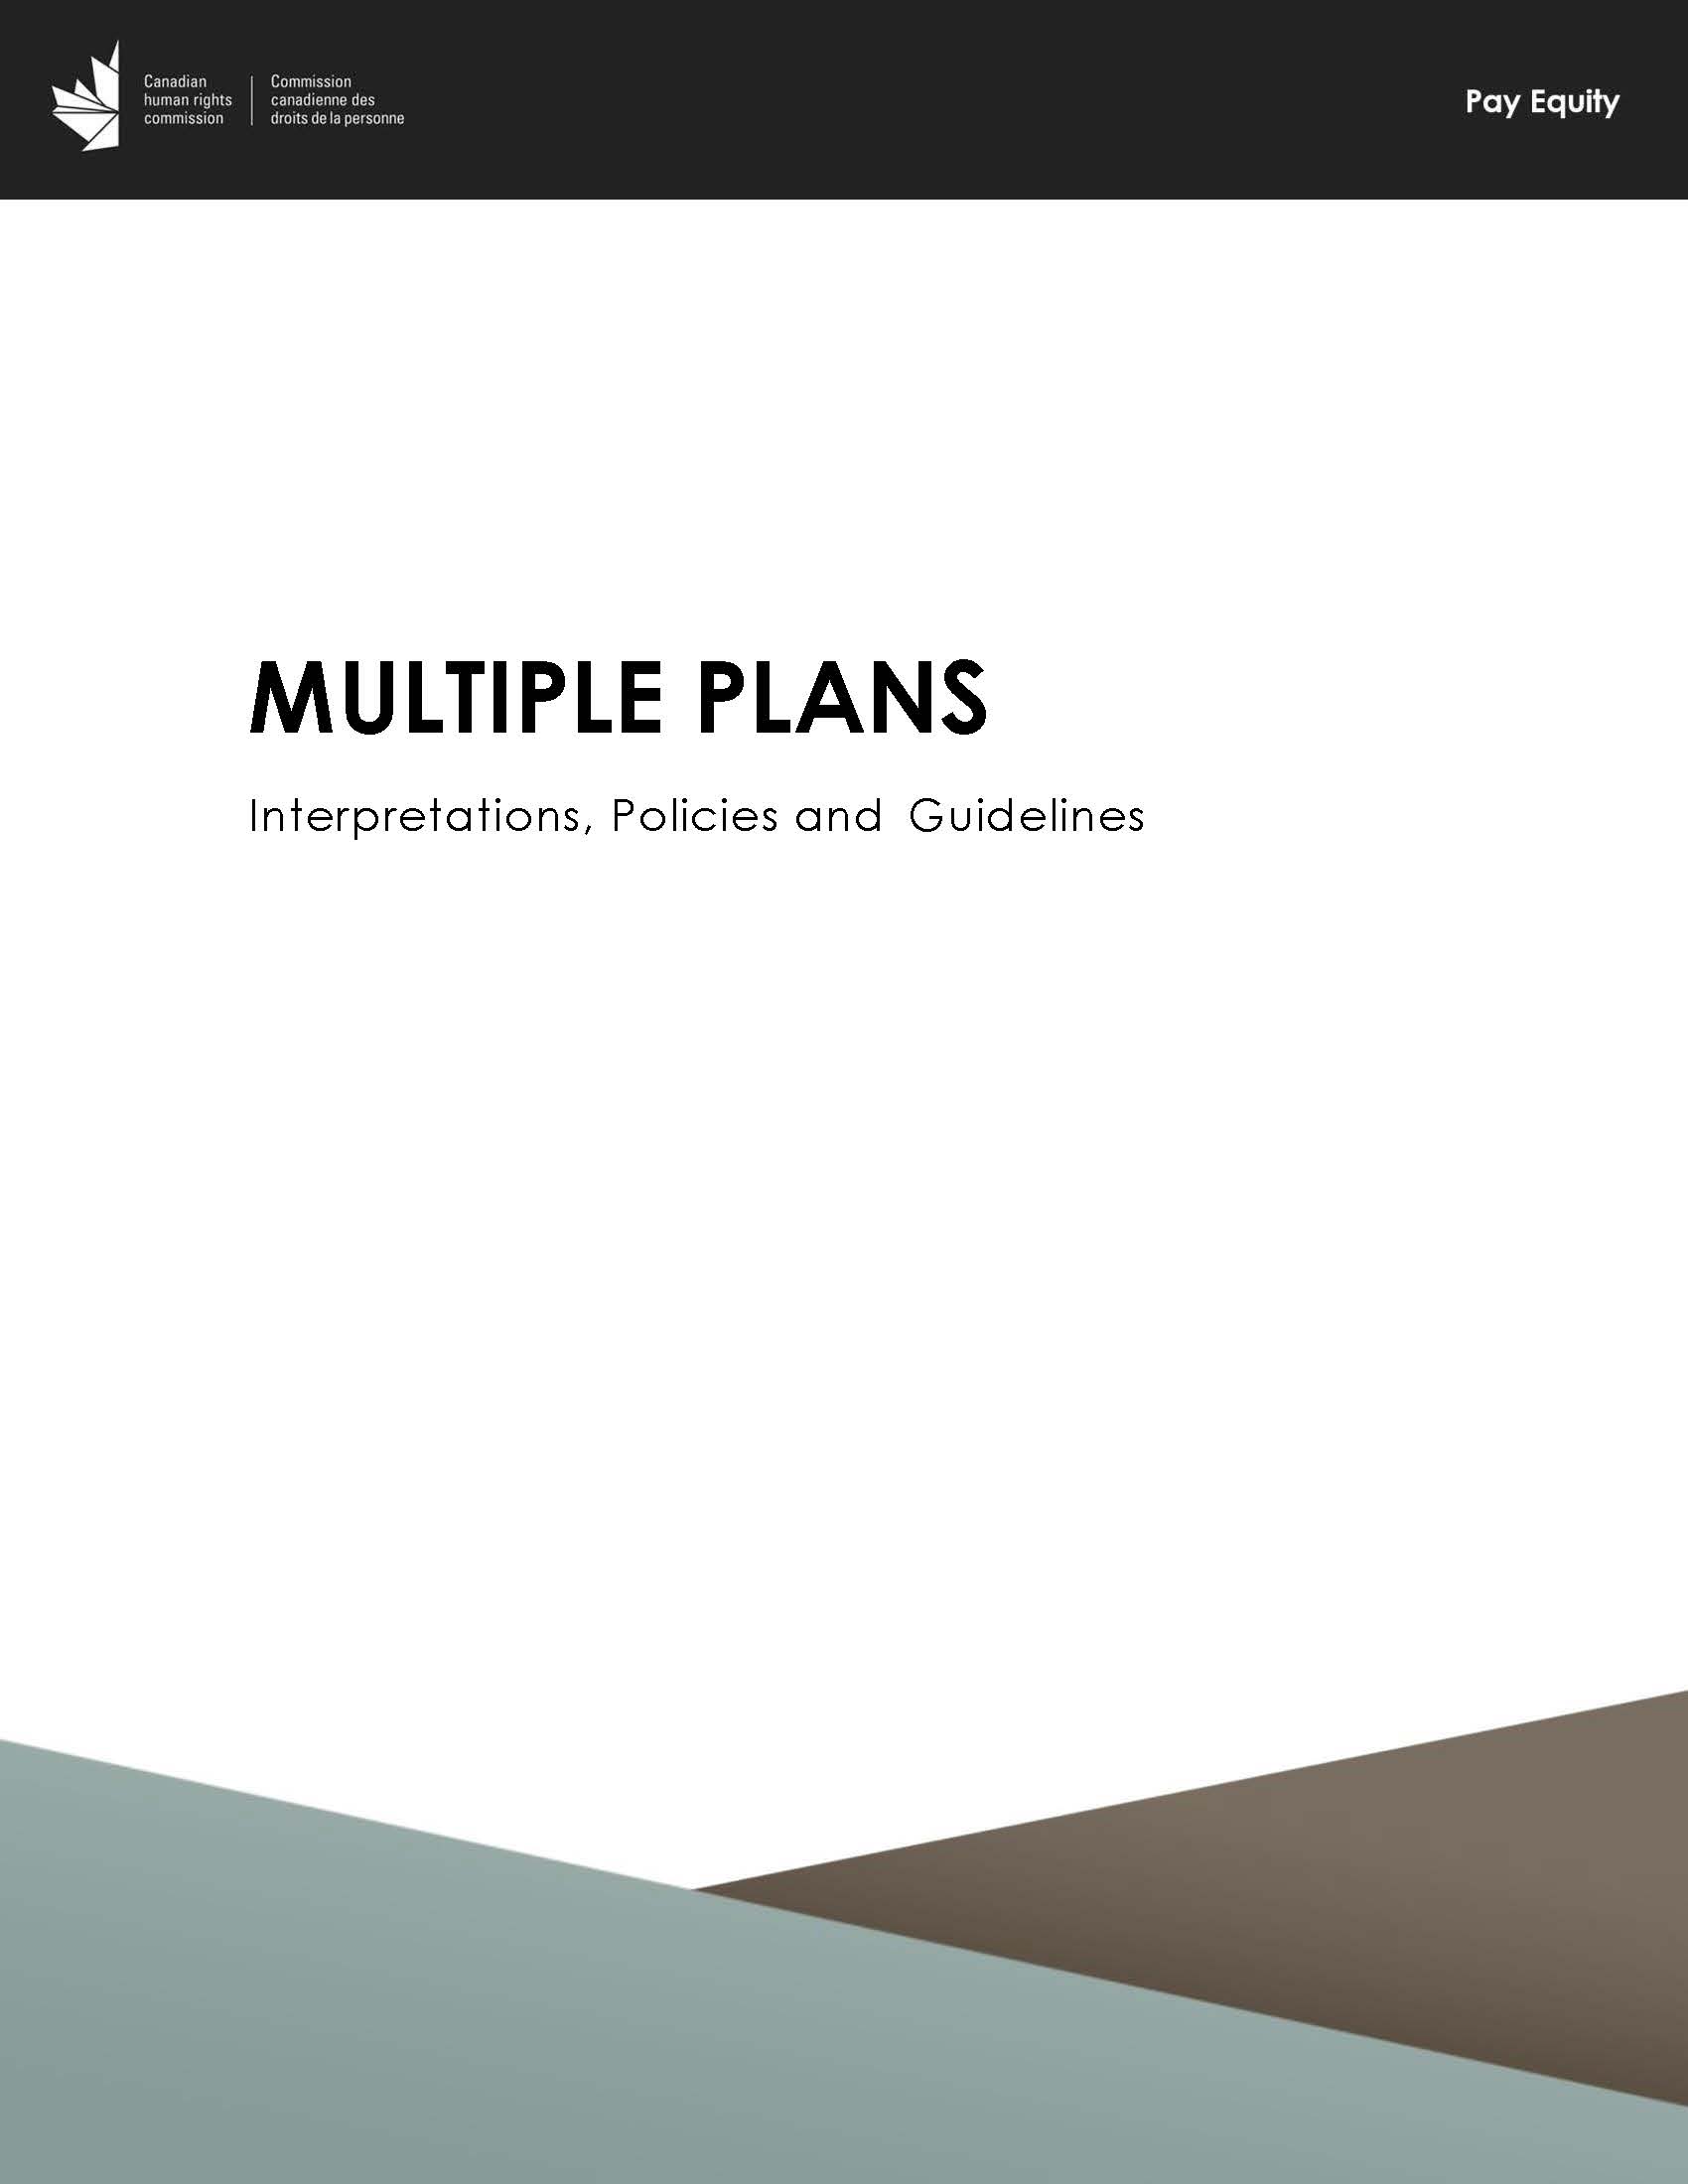 Multiple Plans - Interpretations, Policies and Guidelines